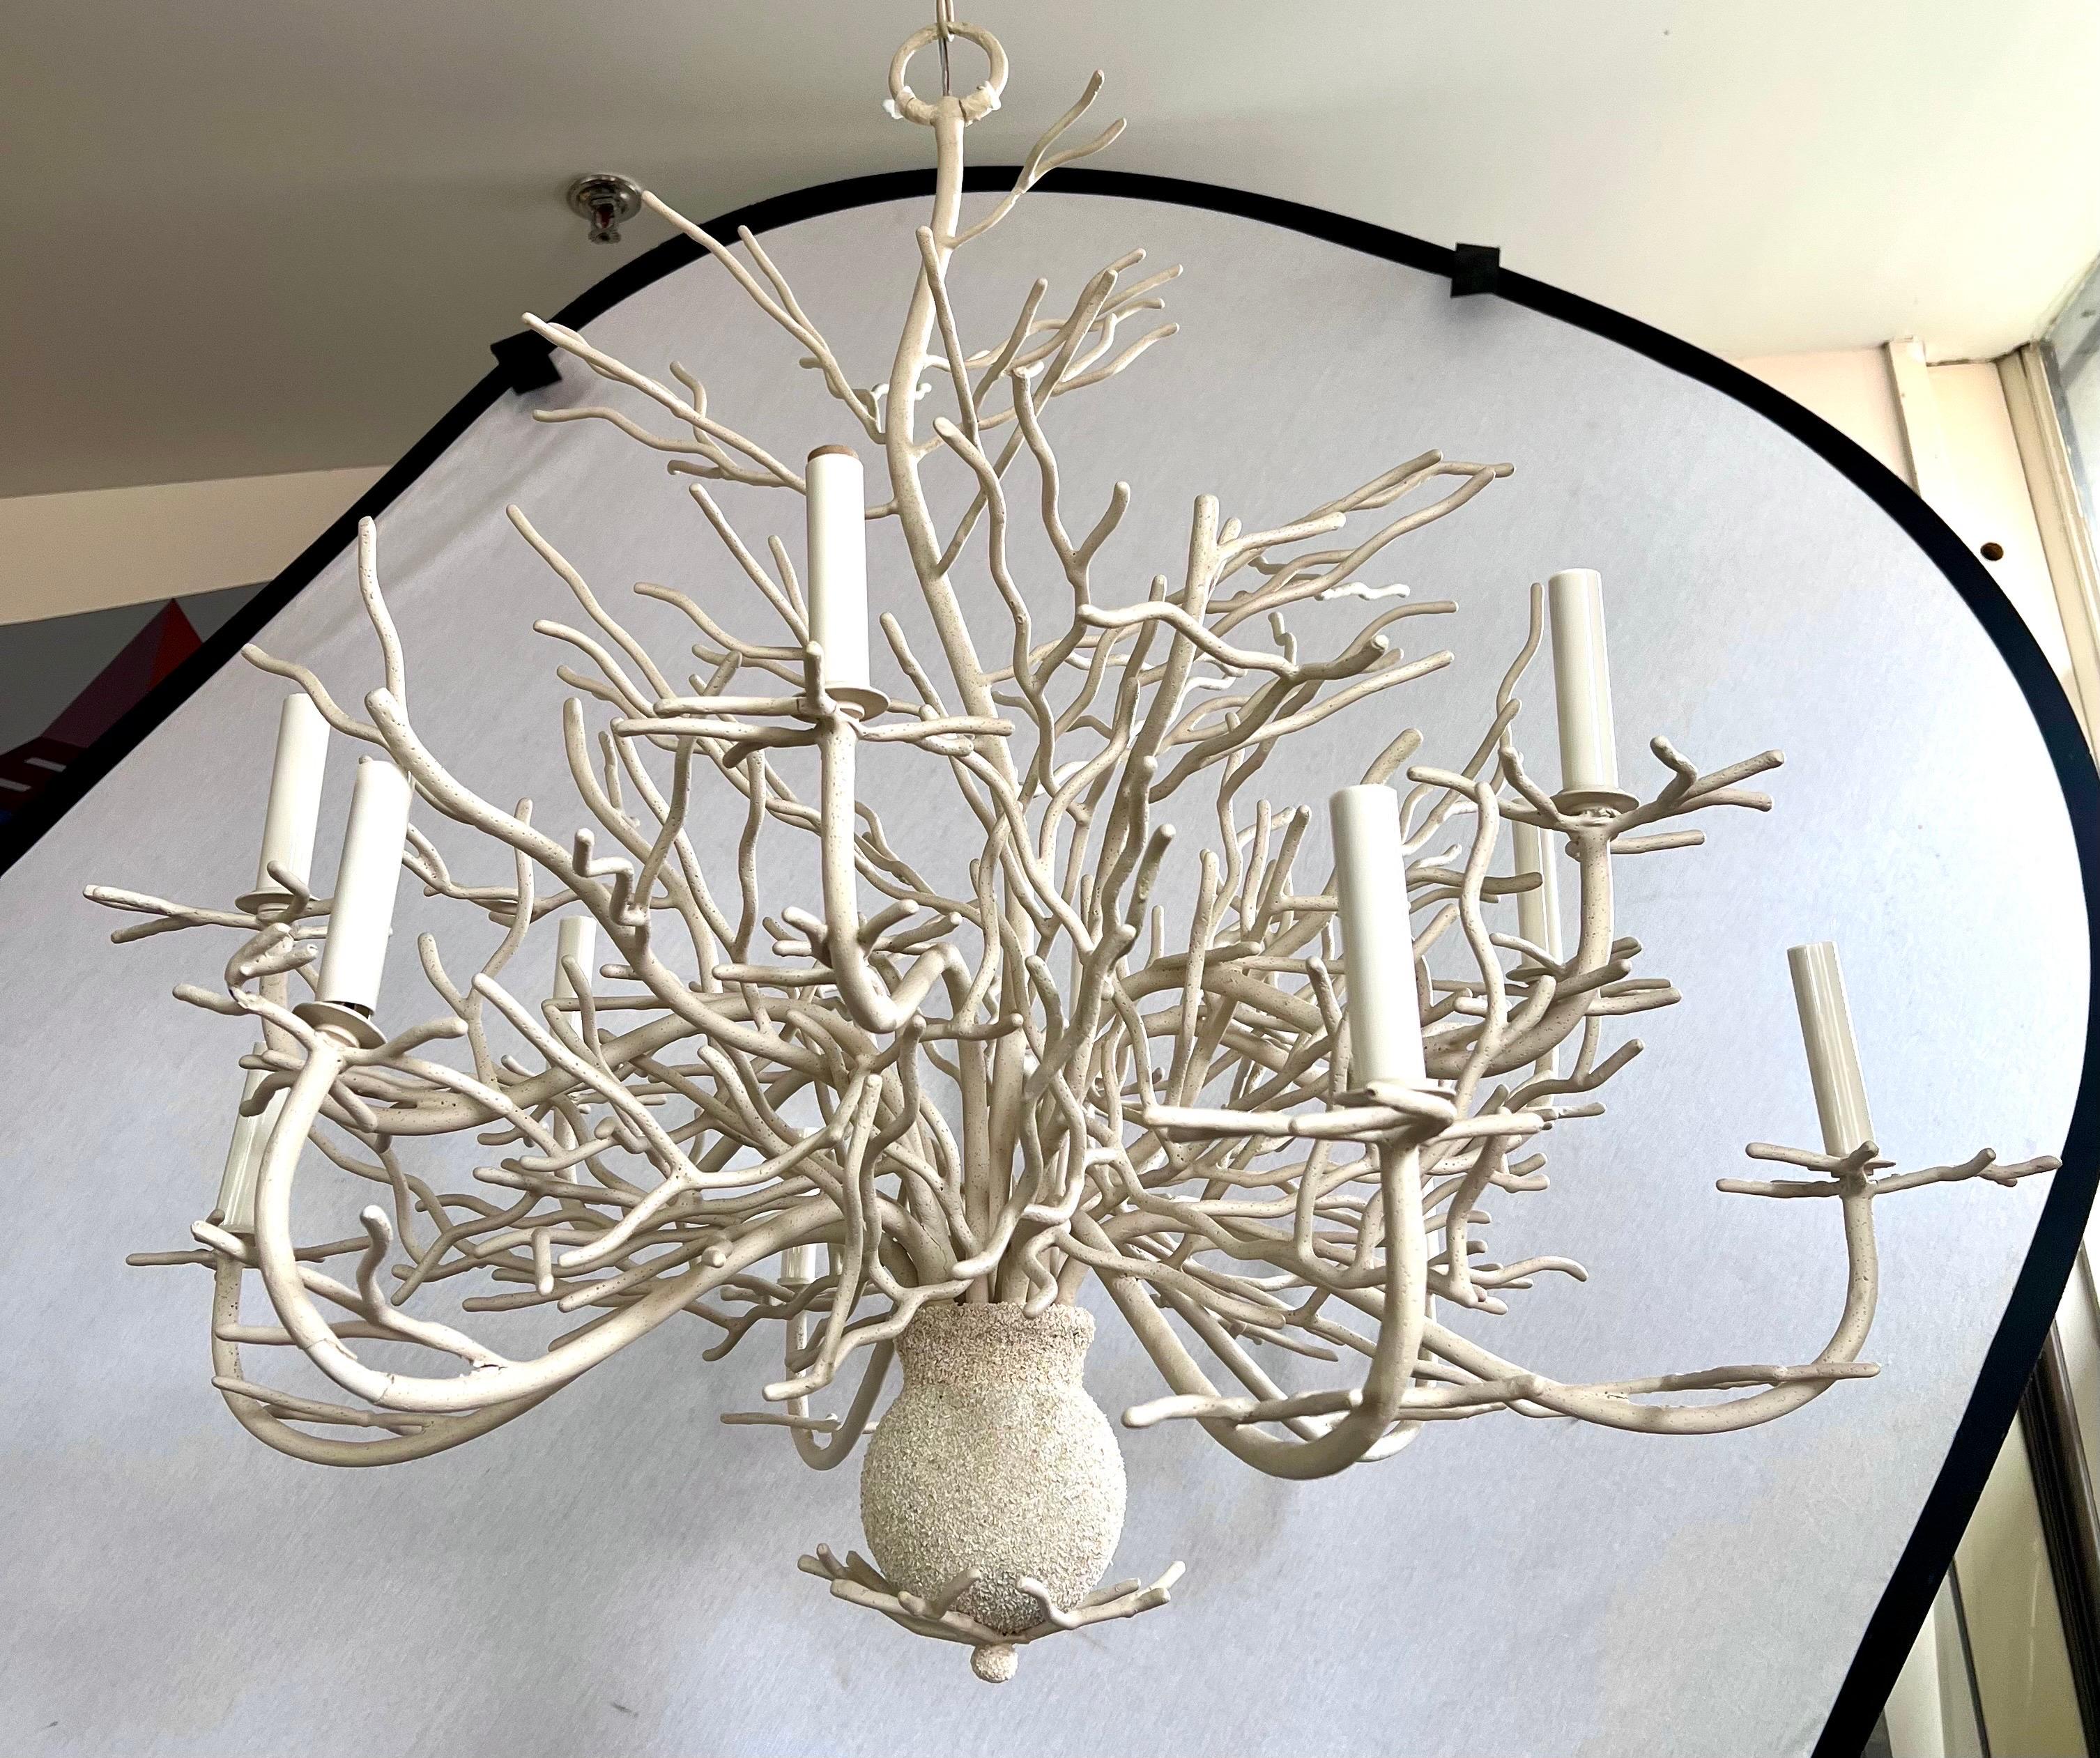 Made to look like sea coral, this large 12 light chandelier would look perfect in your beach side home. Still manufactured by Currey & Co. Shades can be purchased there